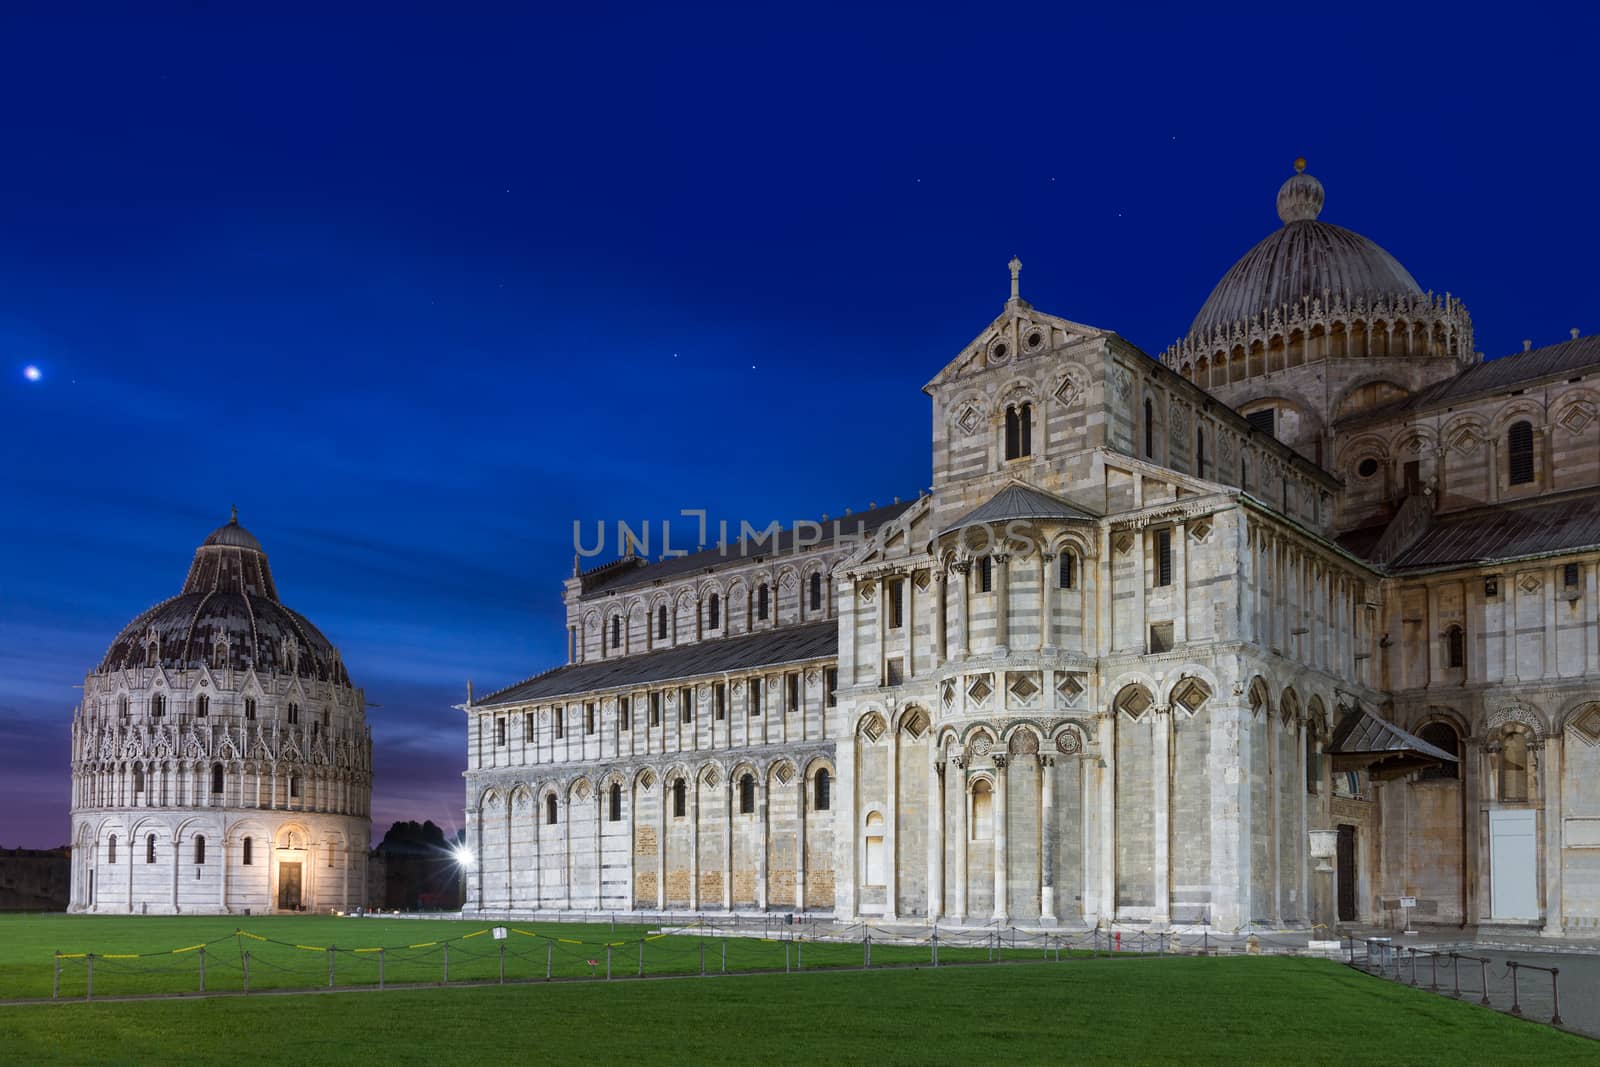 Baptistry and dome of Pisa after sunset, Tuscany, Italy by fisfra